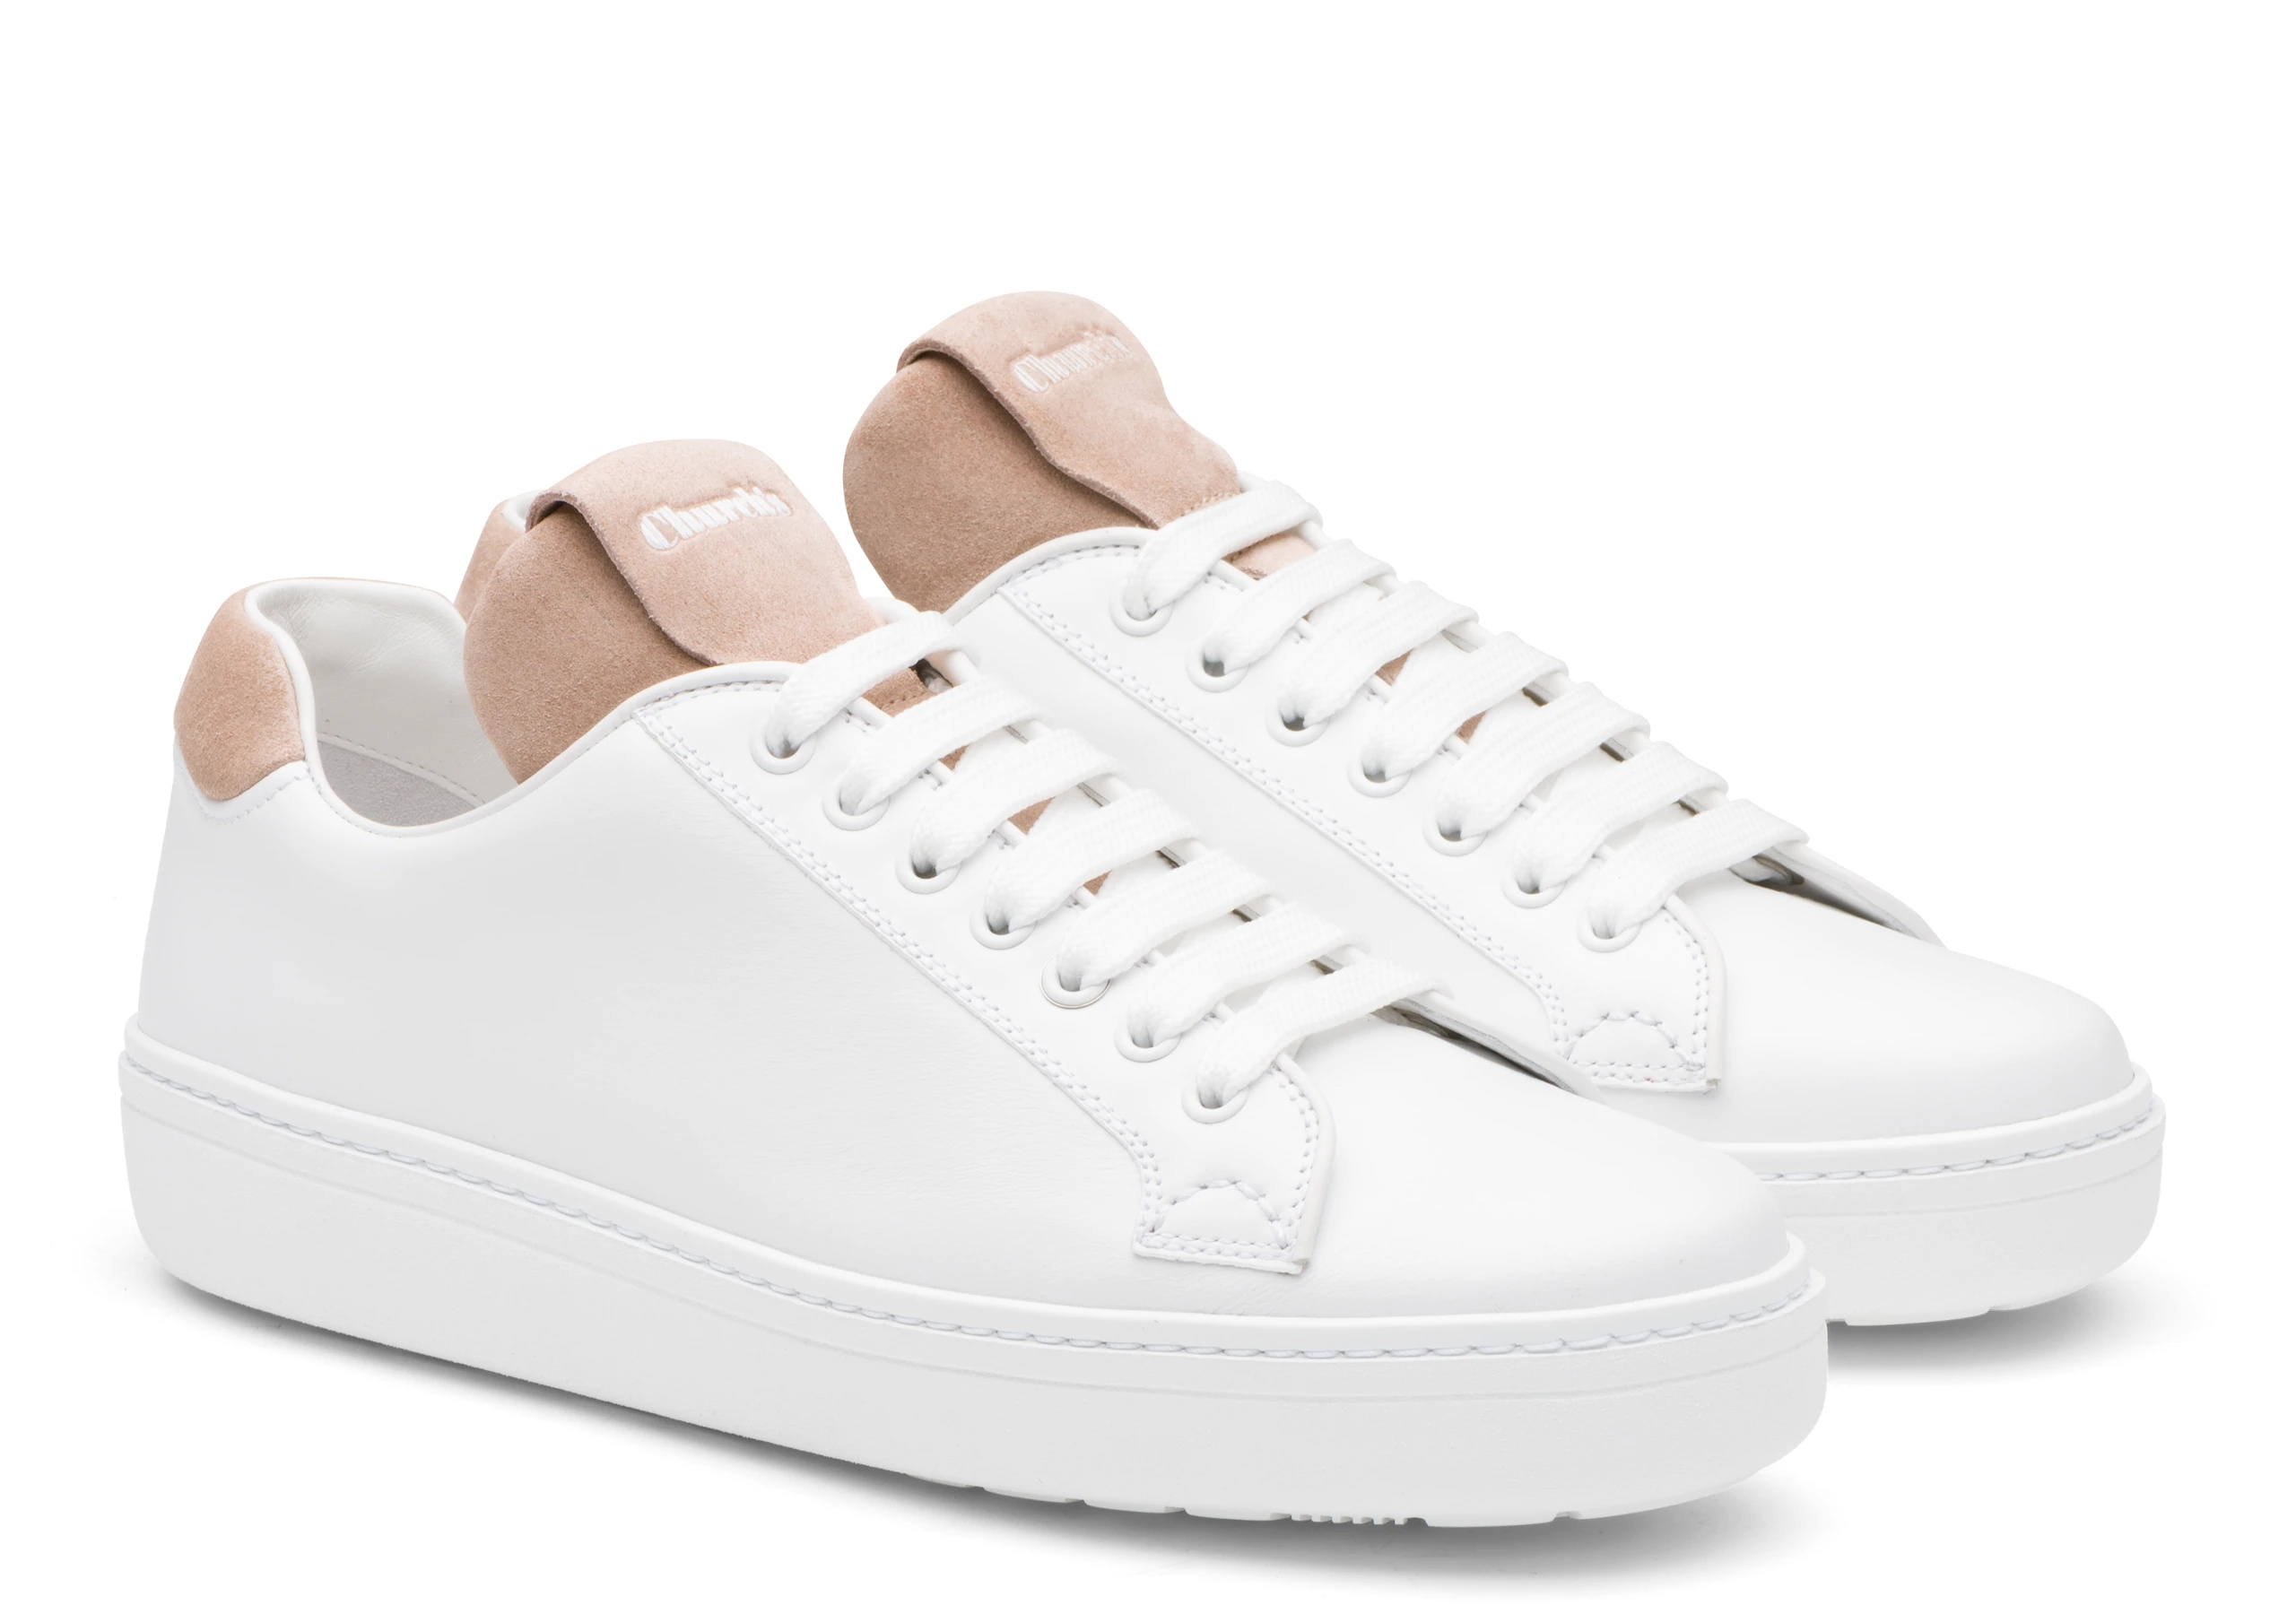 Boland
Calf Leather and Suede Classic Sneaker White/blush - 2